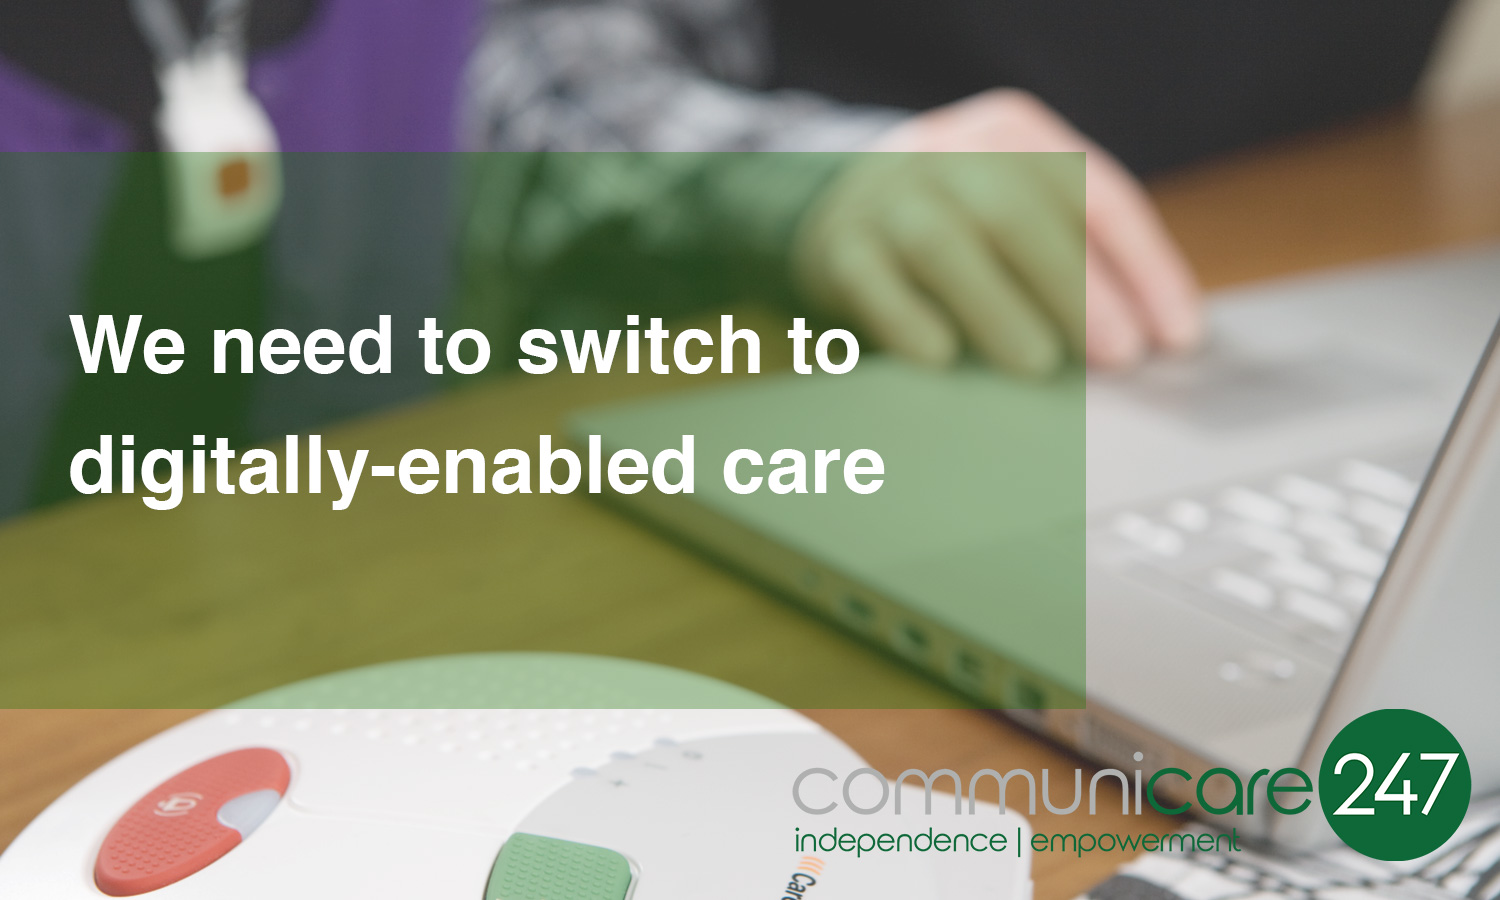 We need to switch to digitally-enabled care